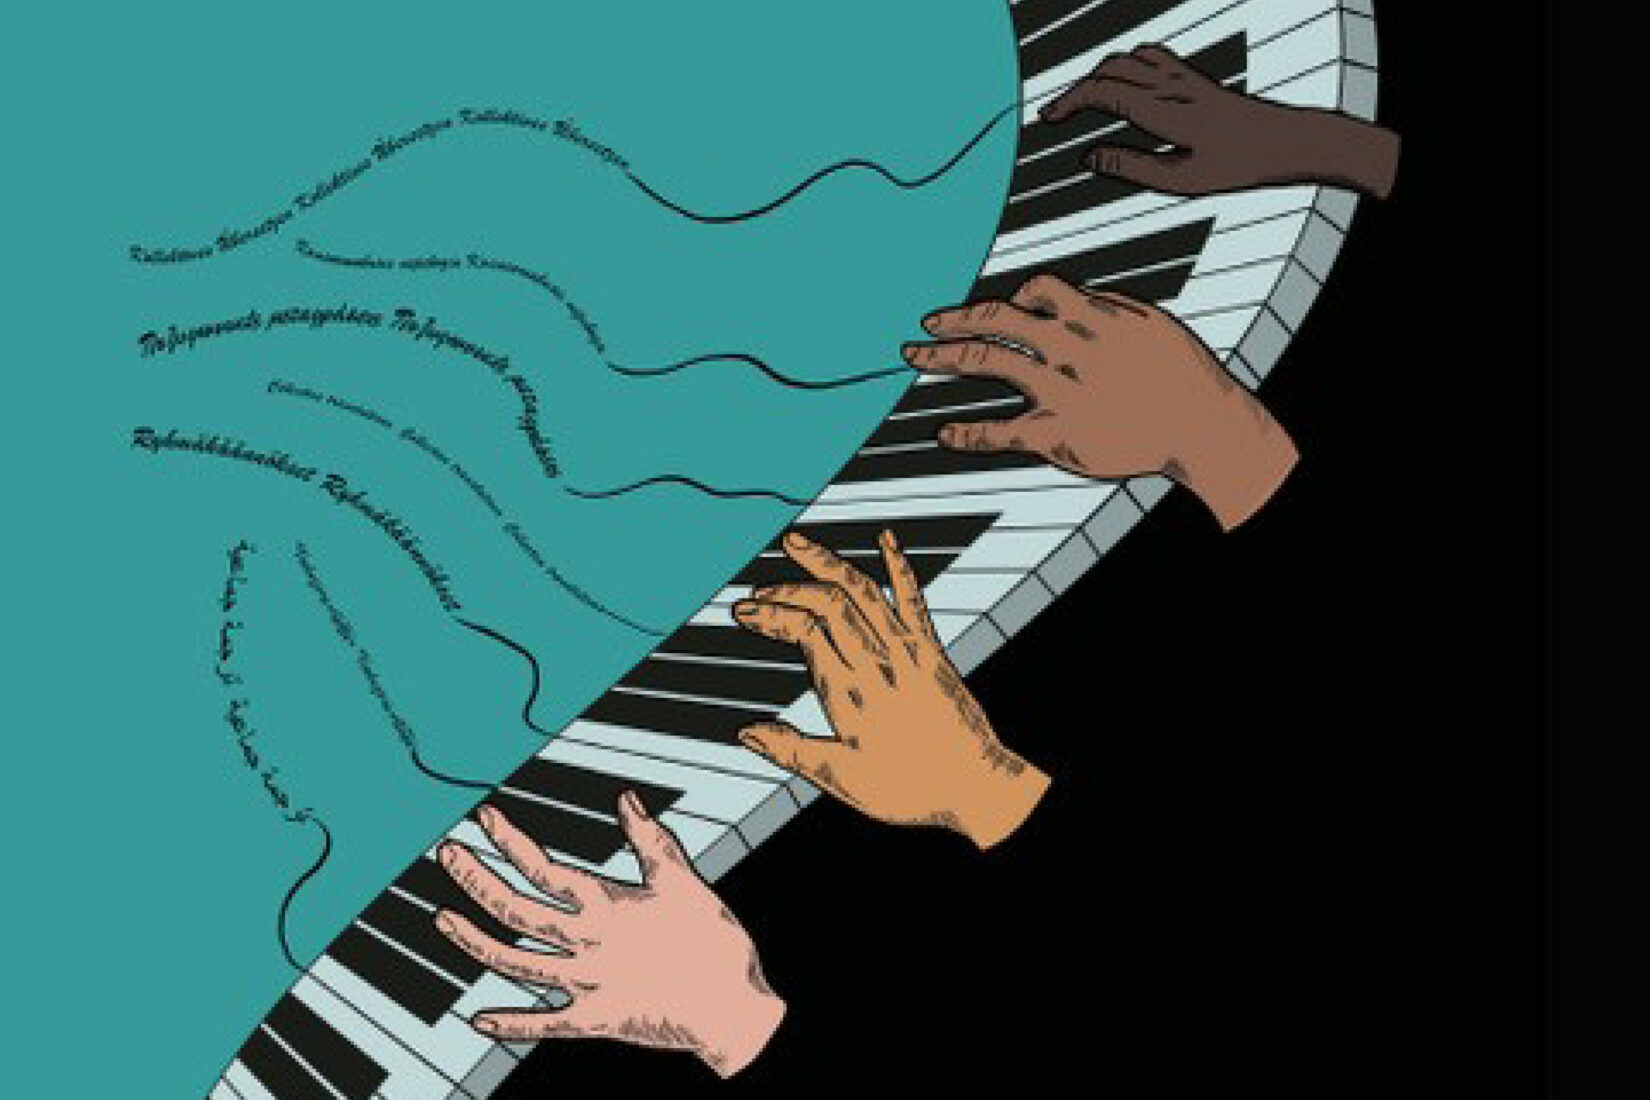 Illustration showing hands of multiple colours playing the piano, the music represented by filets of words floating up in the air.